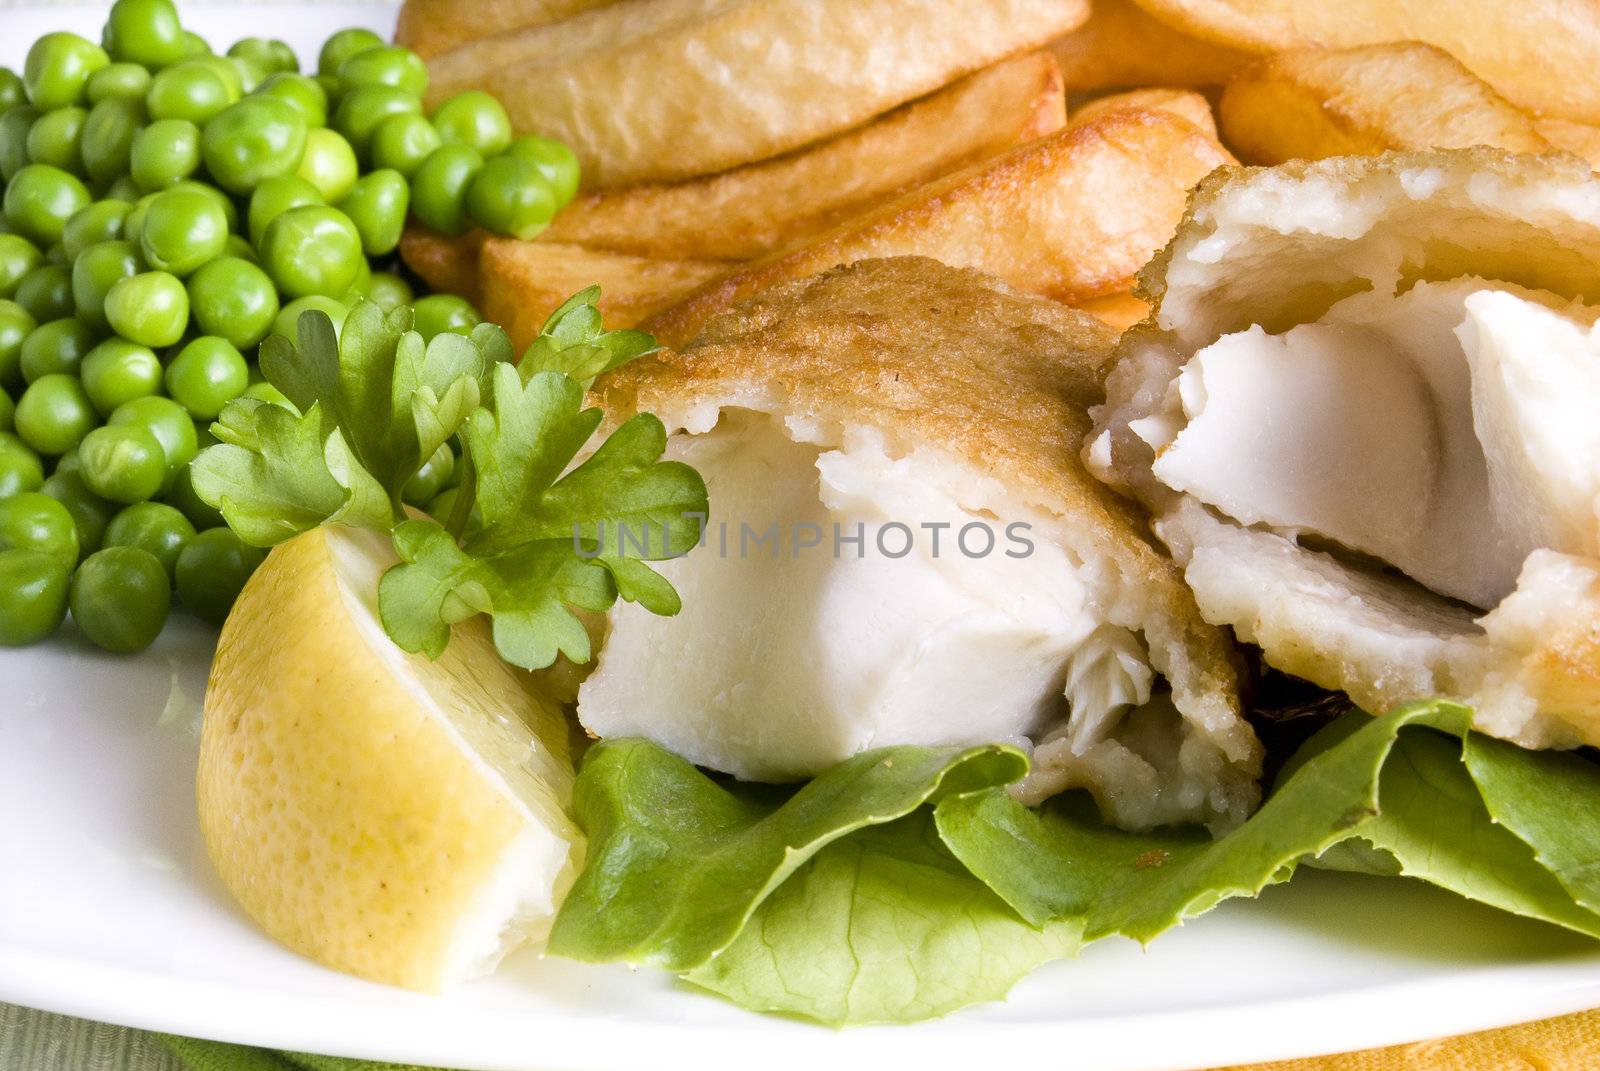 Fried fish and chips with lemon and peas